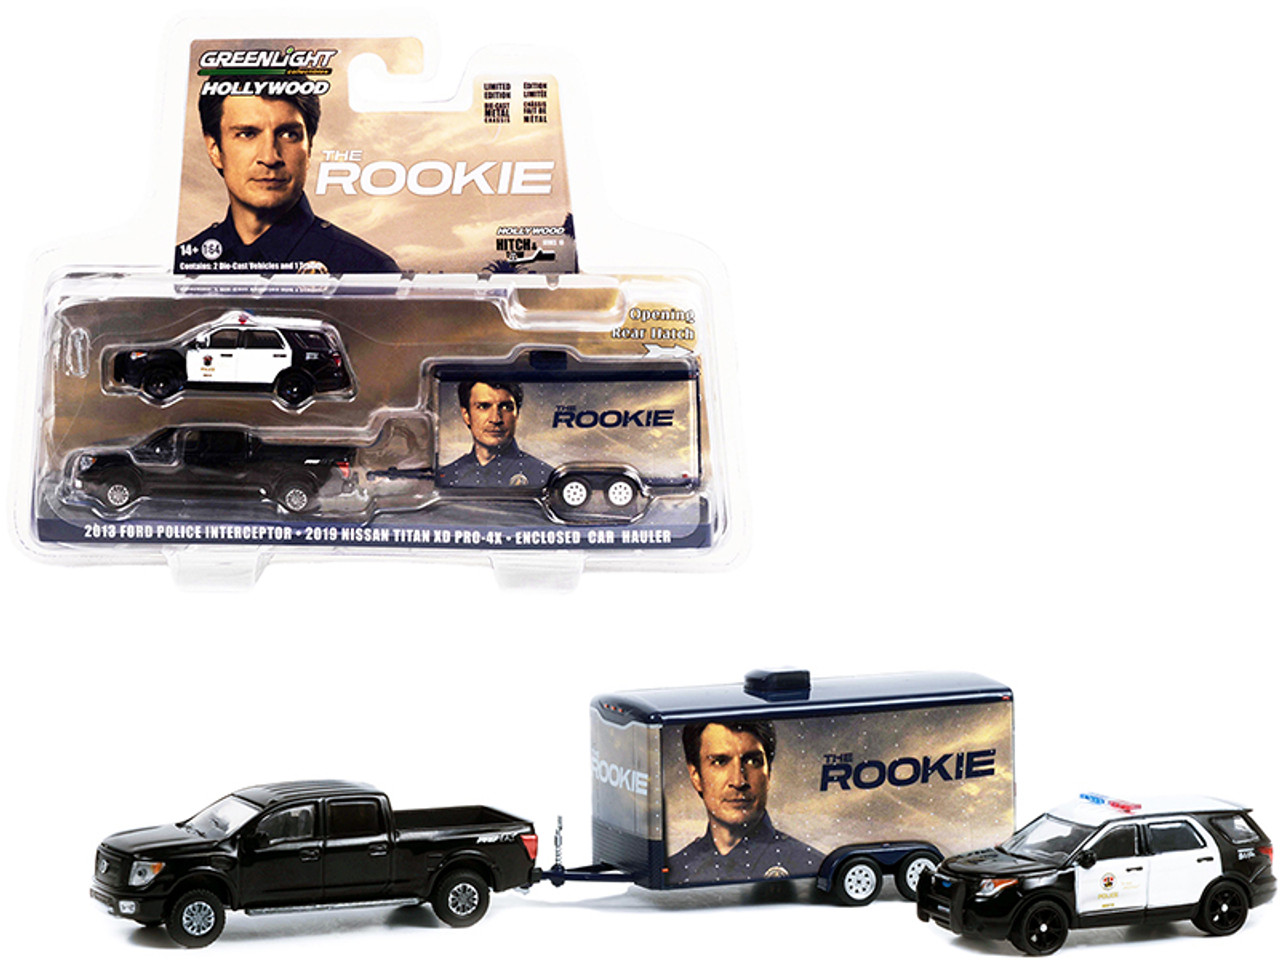 2019 Nissan Titan XD Pro-4X Pickup Truck Black with 2013 Ford Police Interceptor Utility "Los Angeles Police Department" (LAPD) and Enclosed Car Hauler "The Rookie" (2018) TV Series "Hollywood Hitch & Tow" Series 10 1/64 Diecast Models by Greenlight